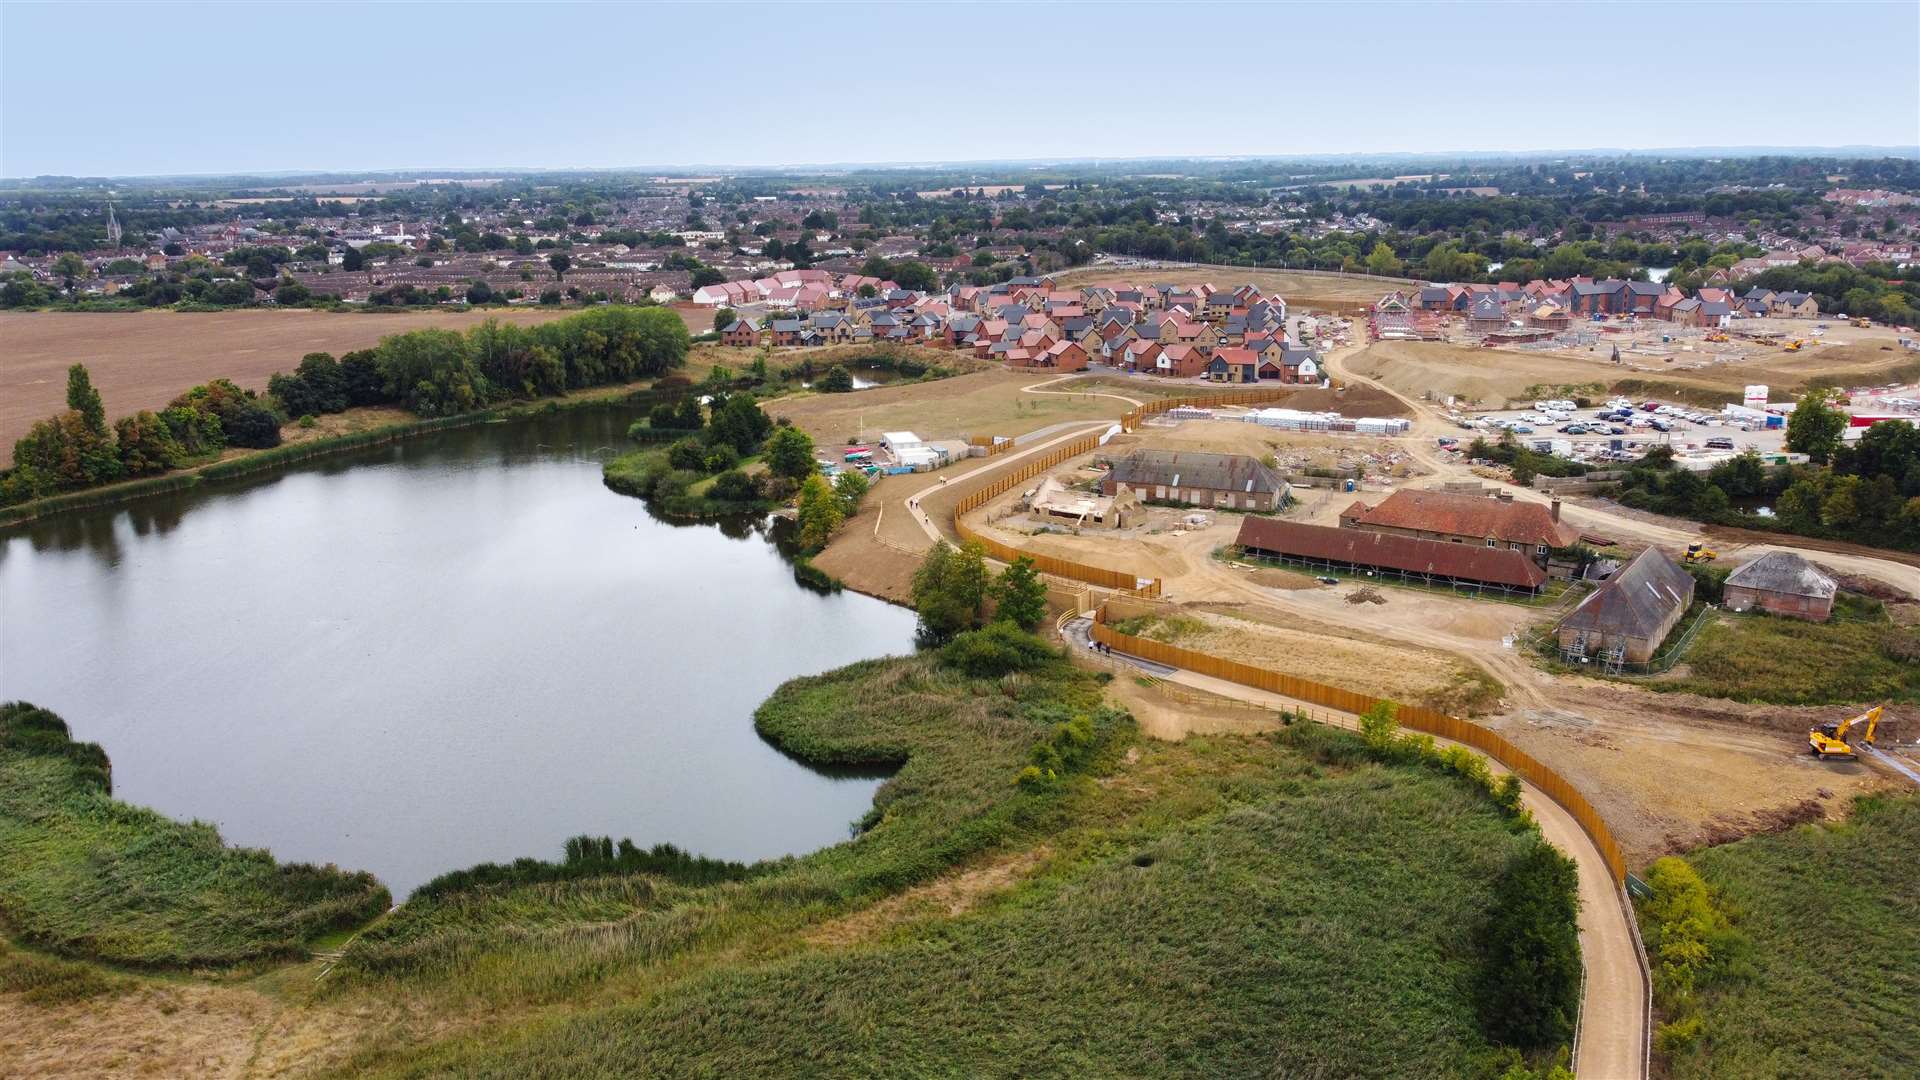 An aerial view of the Faversham Lakes development. Picture: The Anderson Group